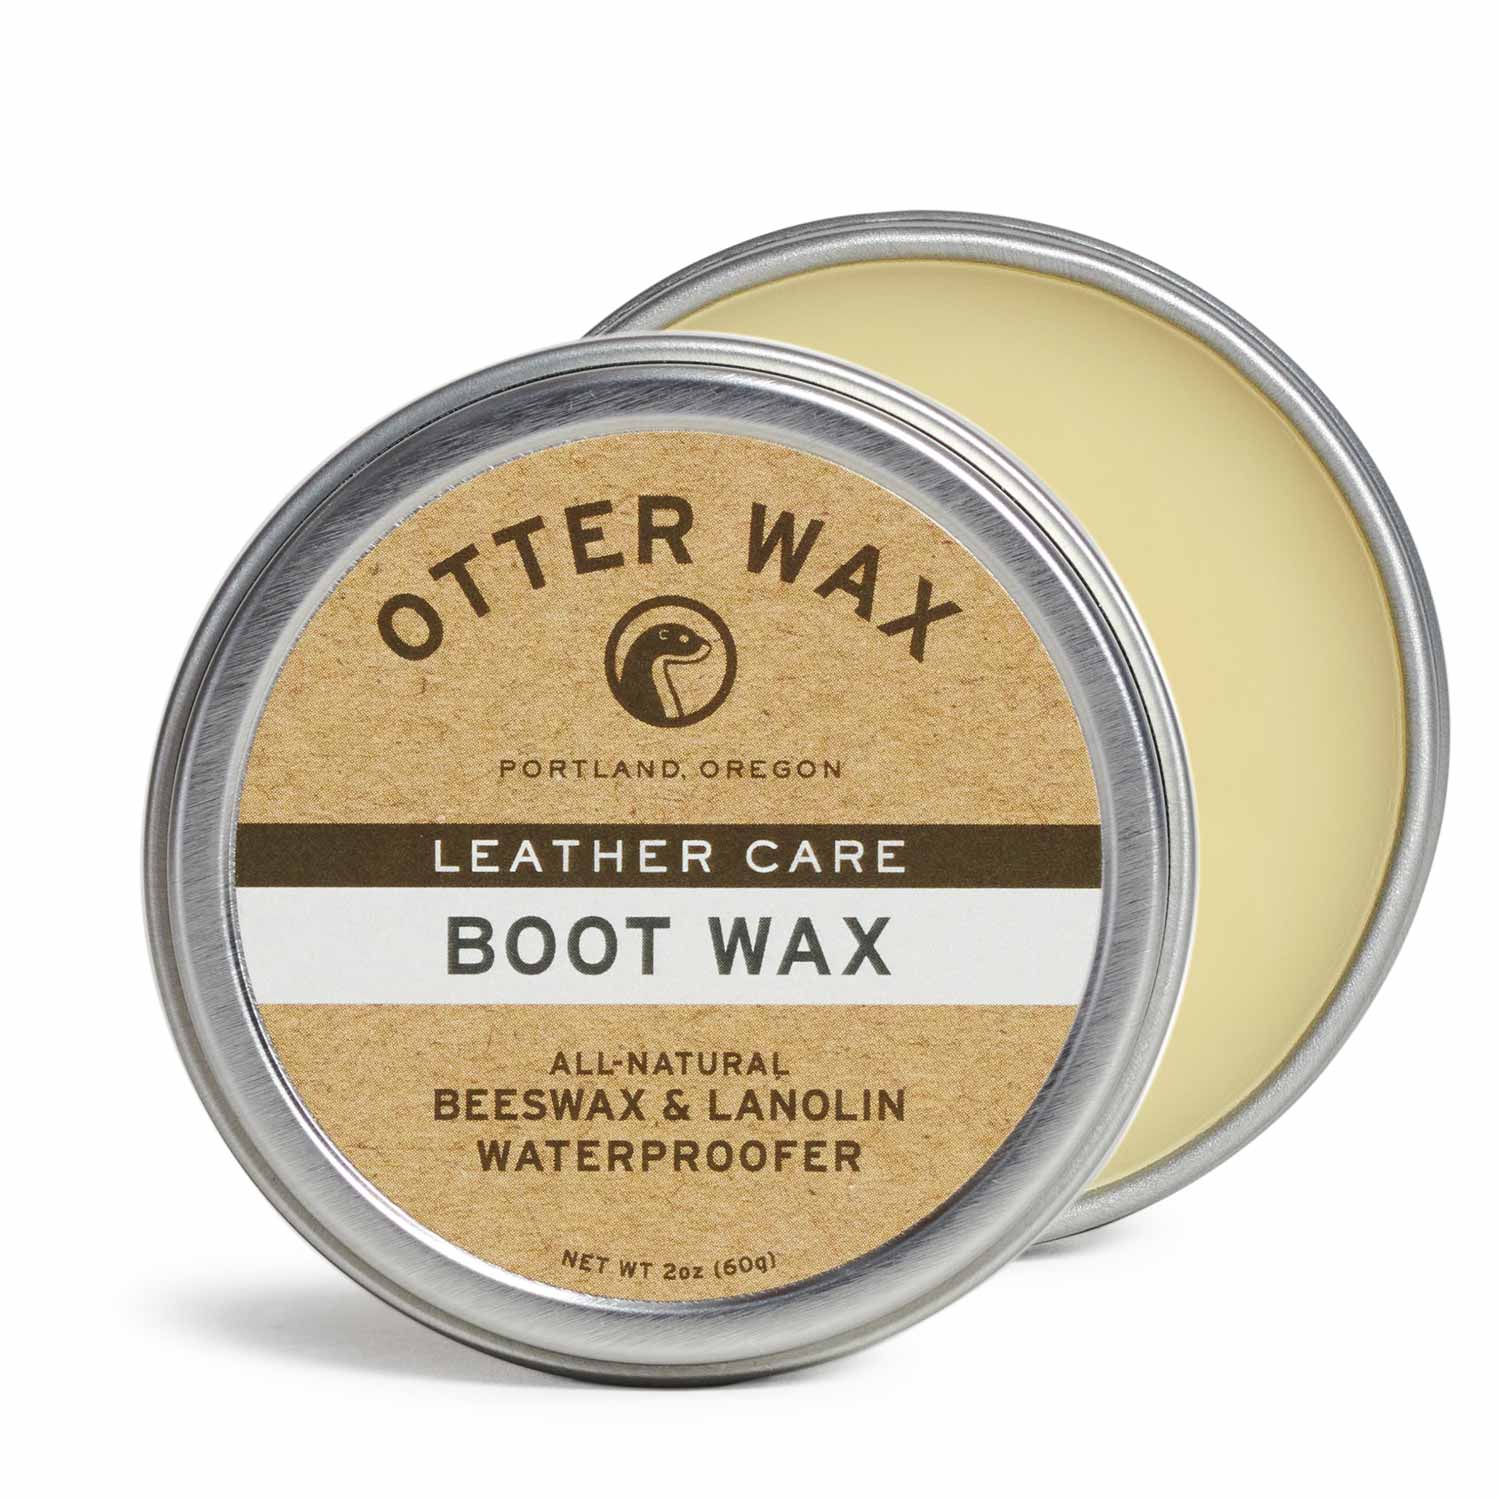 Otter Wax All-Natural Beeswax And Lanolin Waterproofer Treatment For Leather